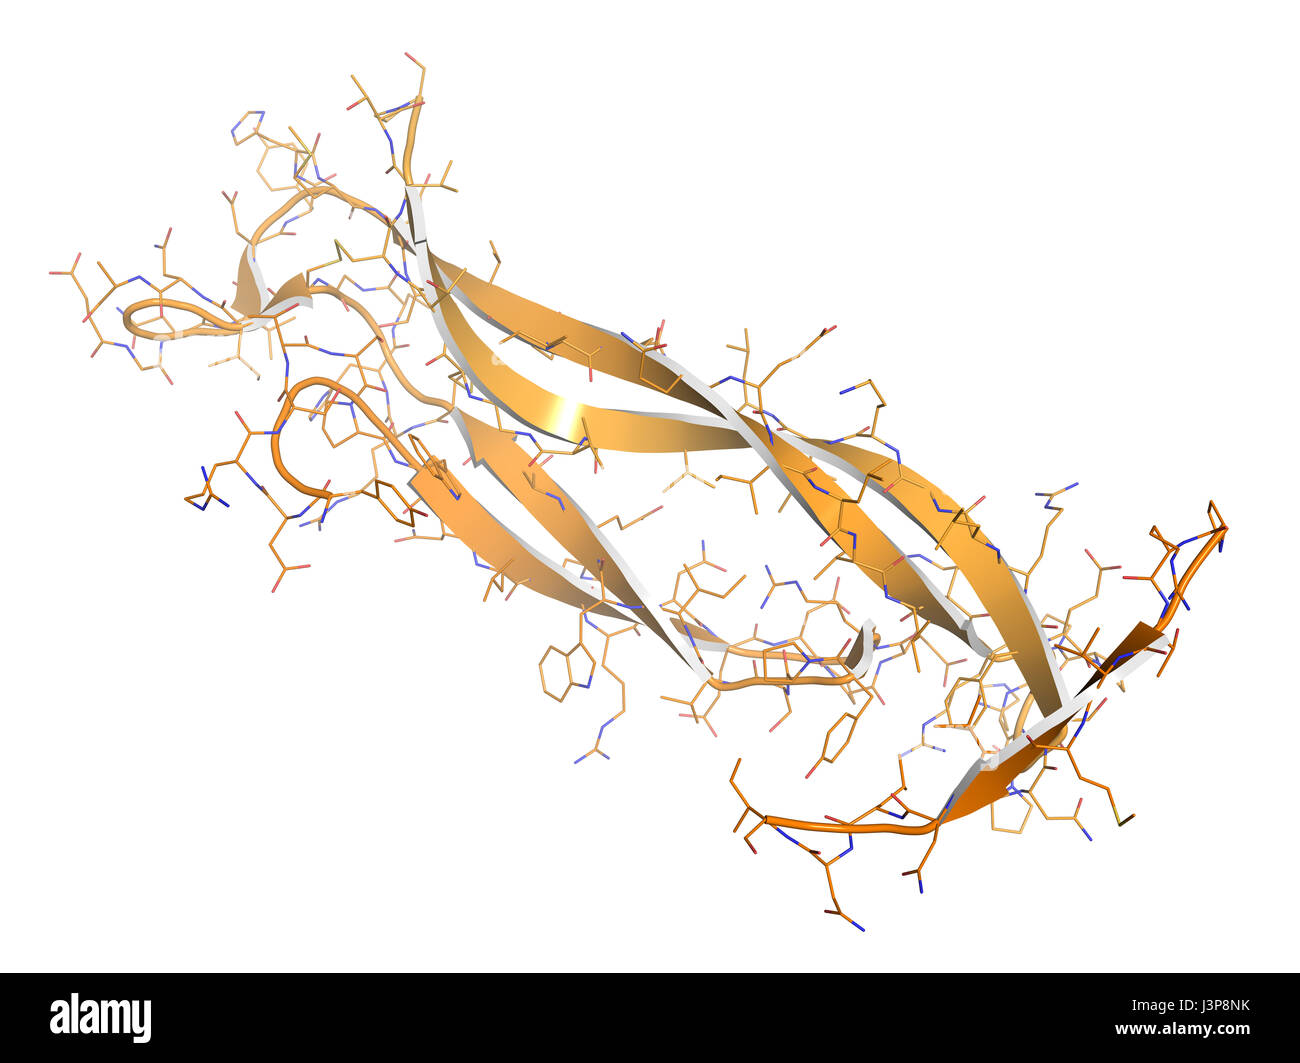 Interleukin 17 (IL-17A, IL-17) cytokine molecule. IL-17 antibodies are evaluated for the treatment of psoriasis and other diseases. Cartoon + line mod Stock Photo